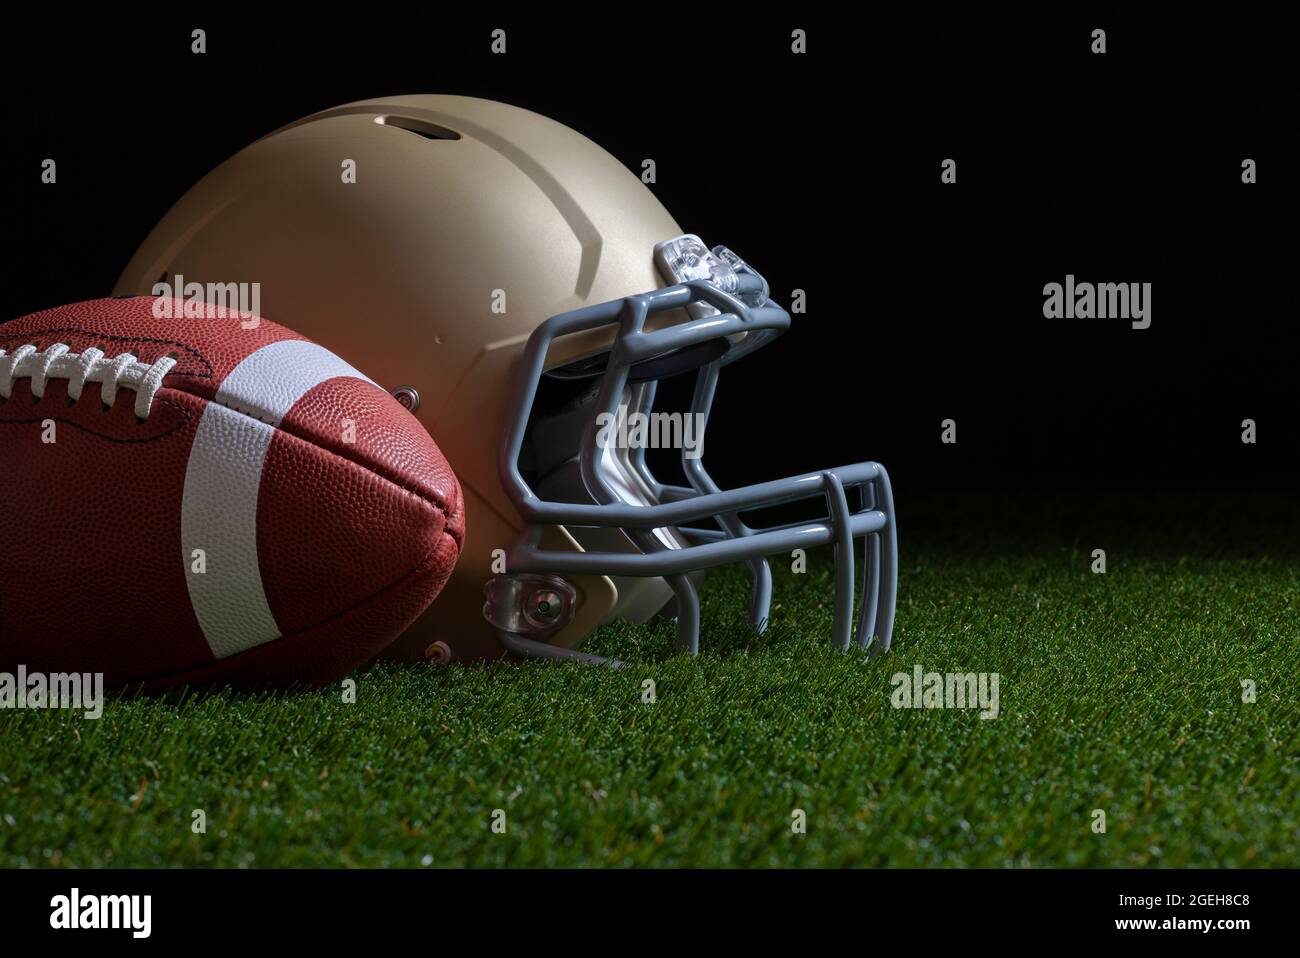 Low angle view of football and gold helmet on grass with dark background Stock Photo